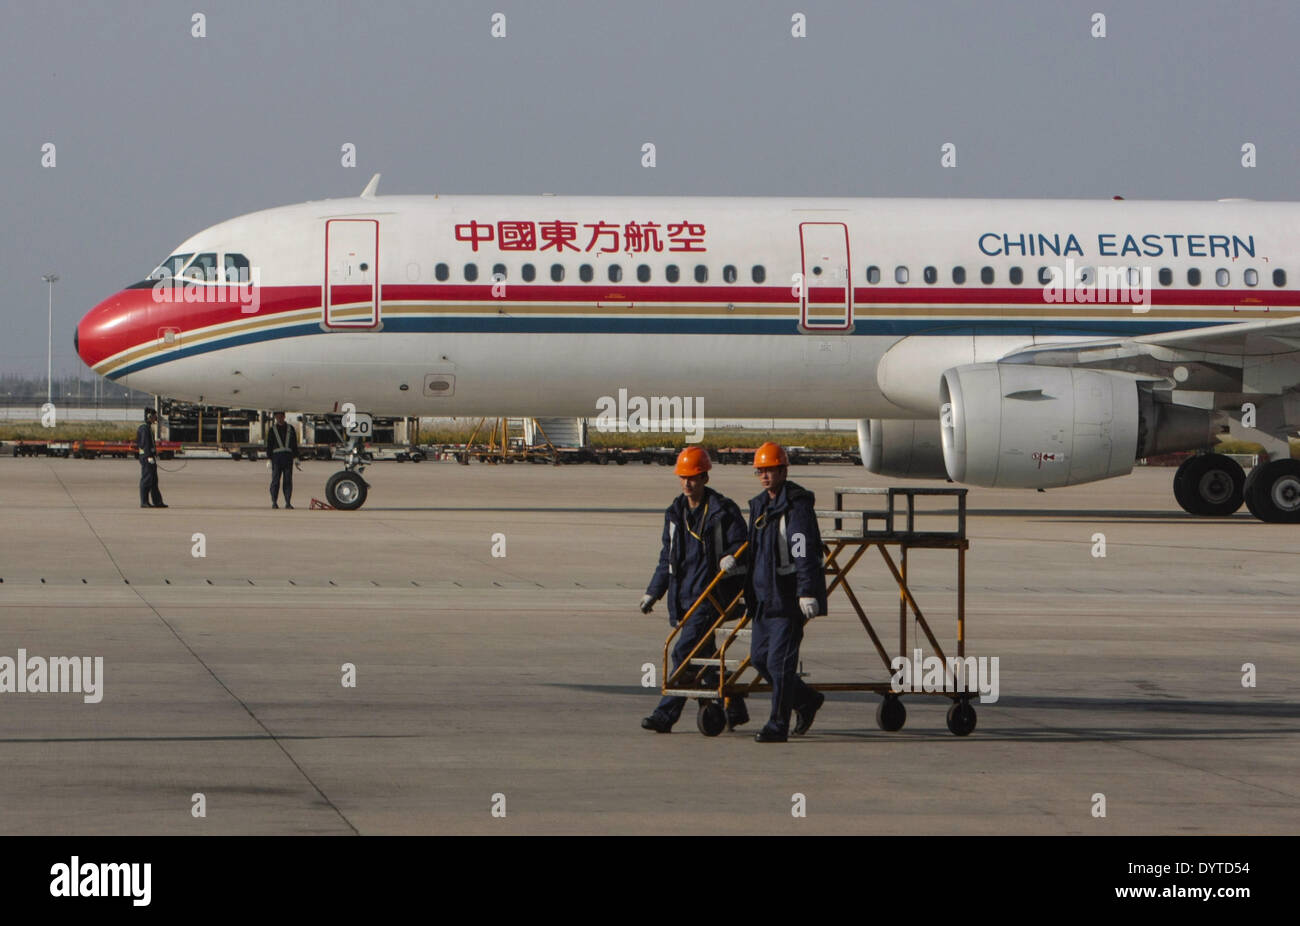 Airport staff walk pass a plane of China Eastern Airline at Shanghai Pudong International Airport on 22 Nov 2007 Stock Photo